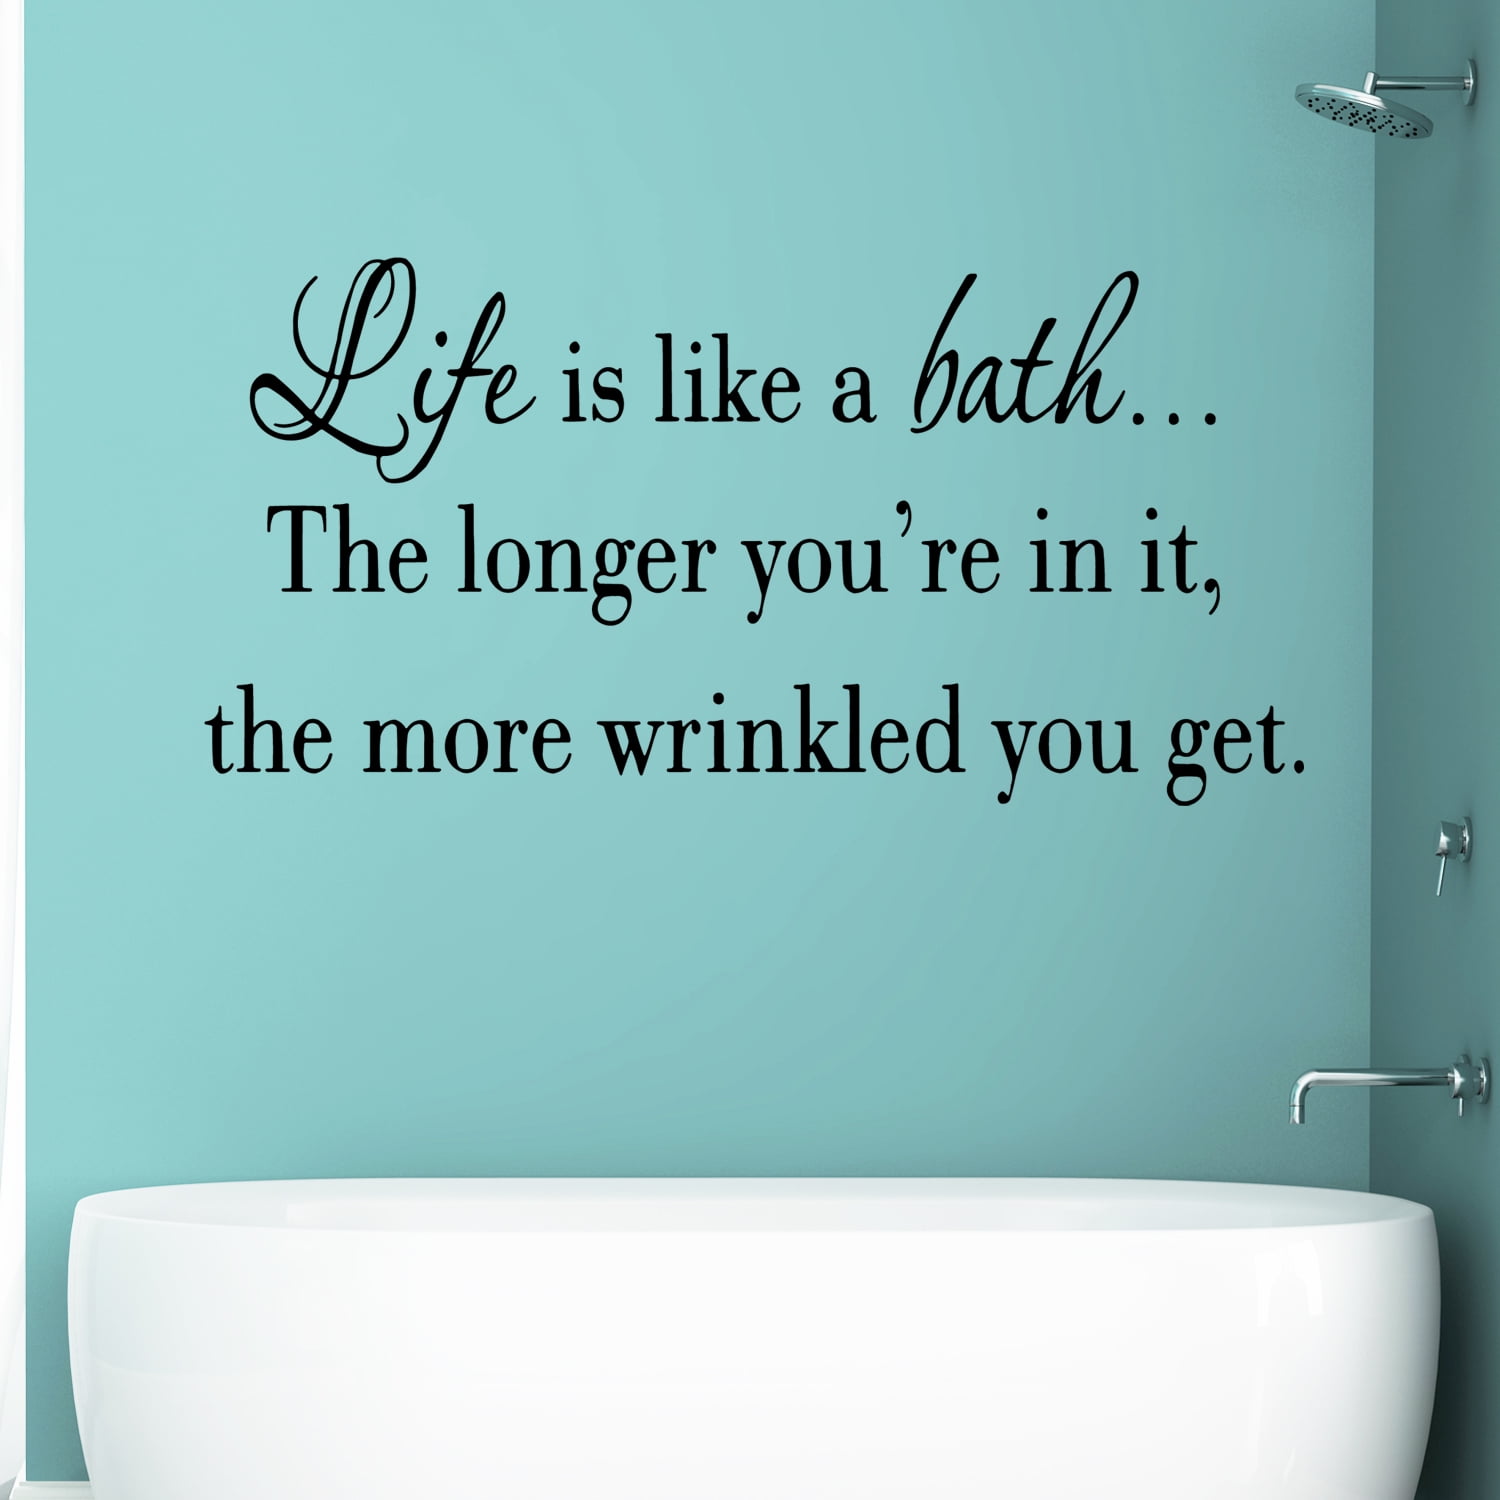 BATHROOM RULES Home Wall Sticker Quotes Bathroom Rules Vinyl Wall Decor Decal c 